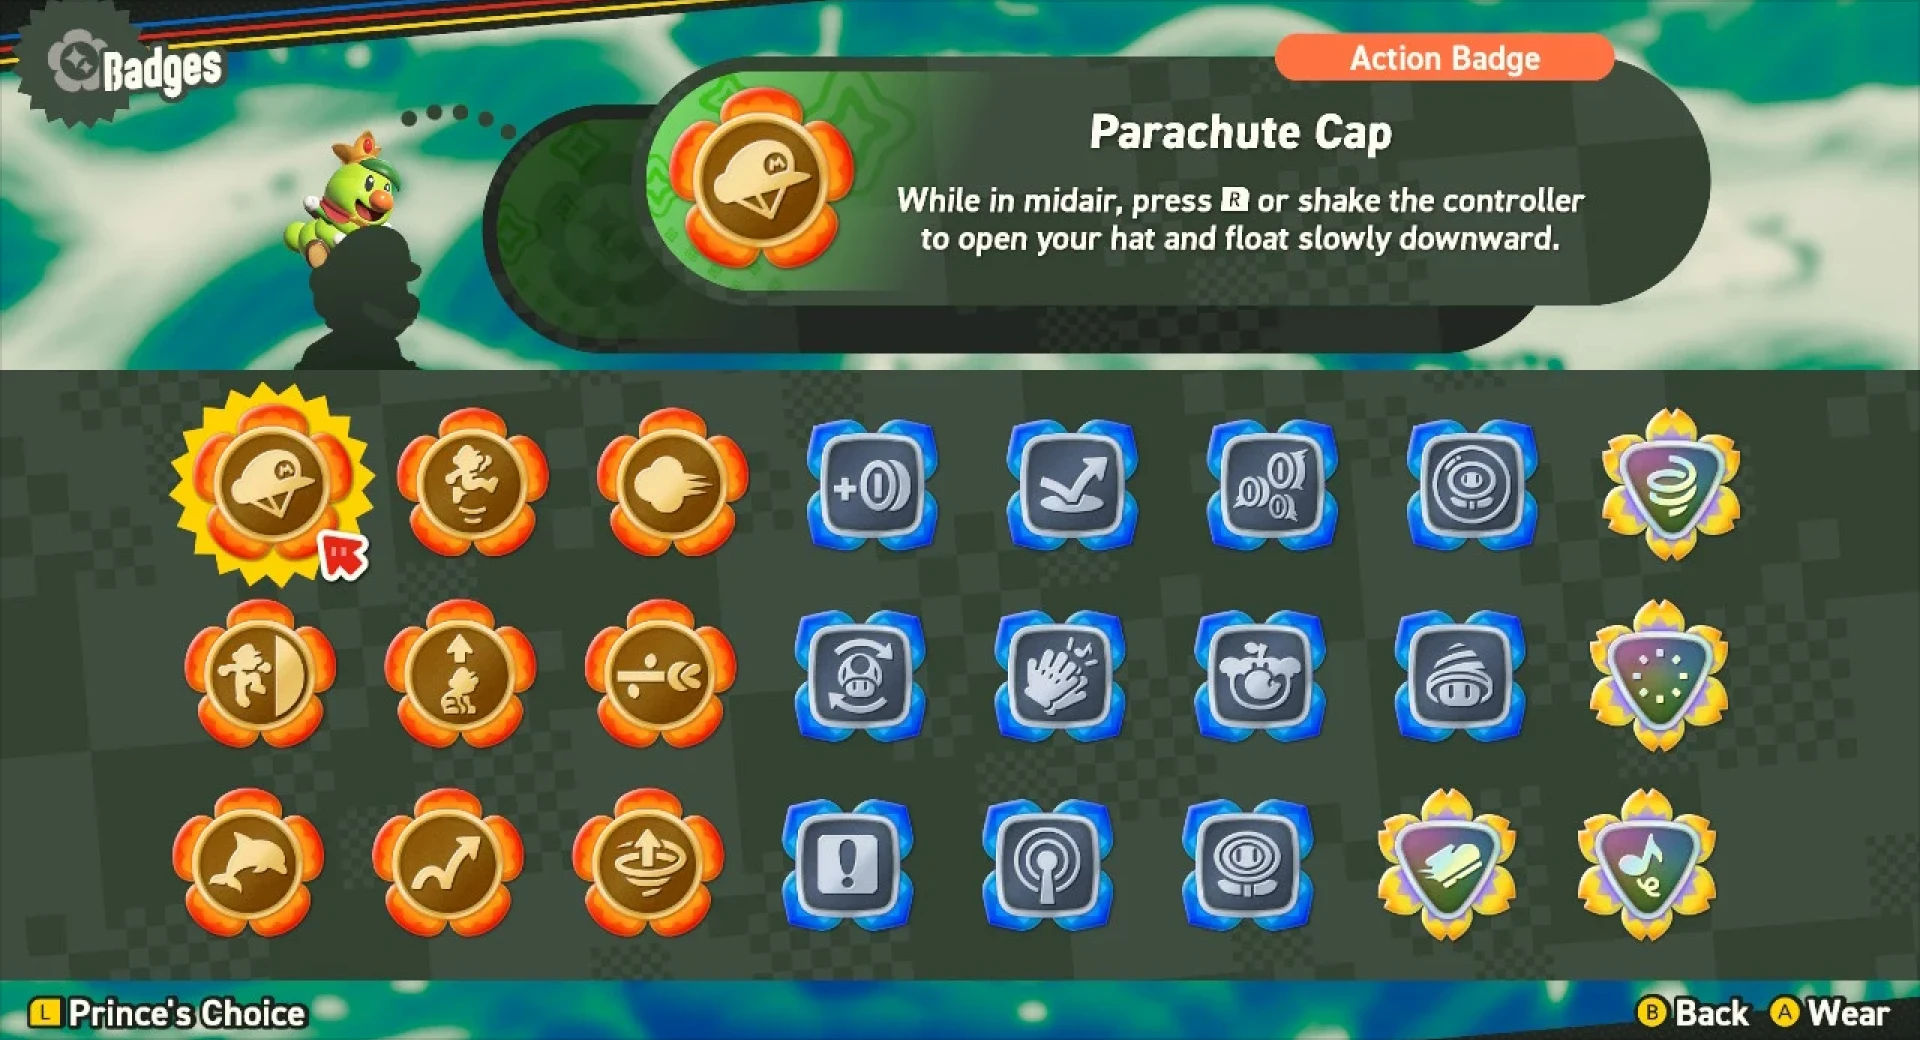 The Super Mario Bros. Wonder Badges are displayed in a grid format with the Parachute Cap action badge selected.